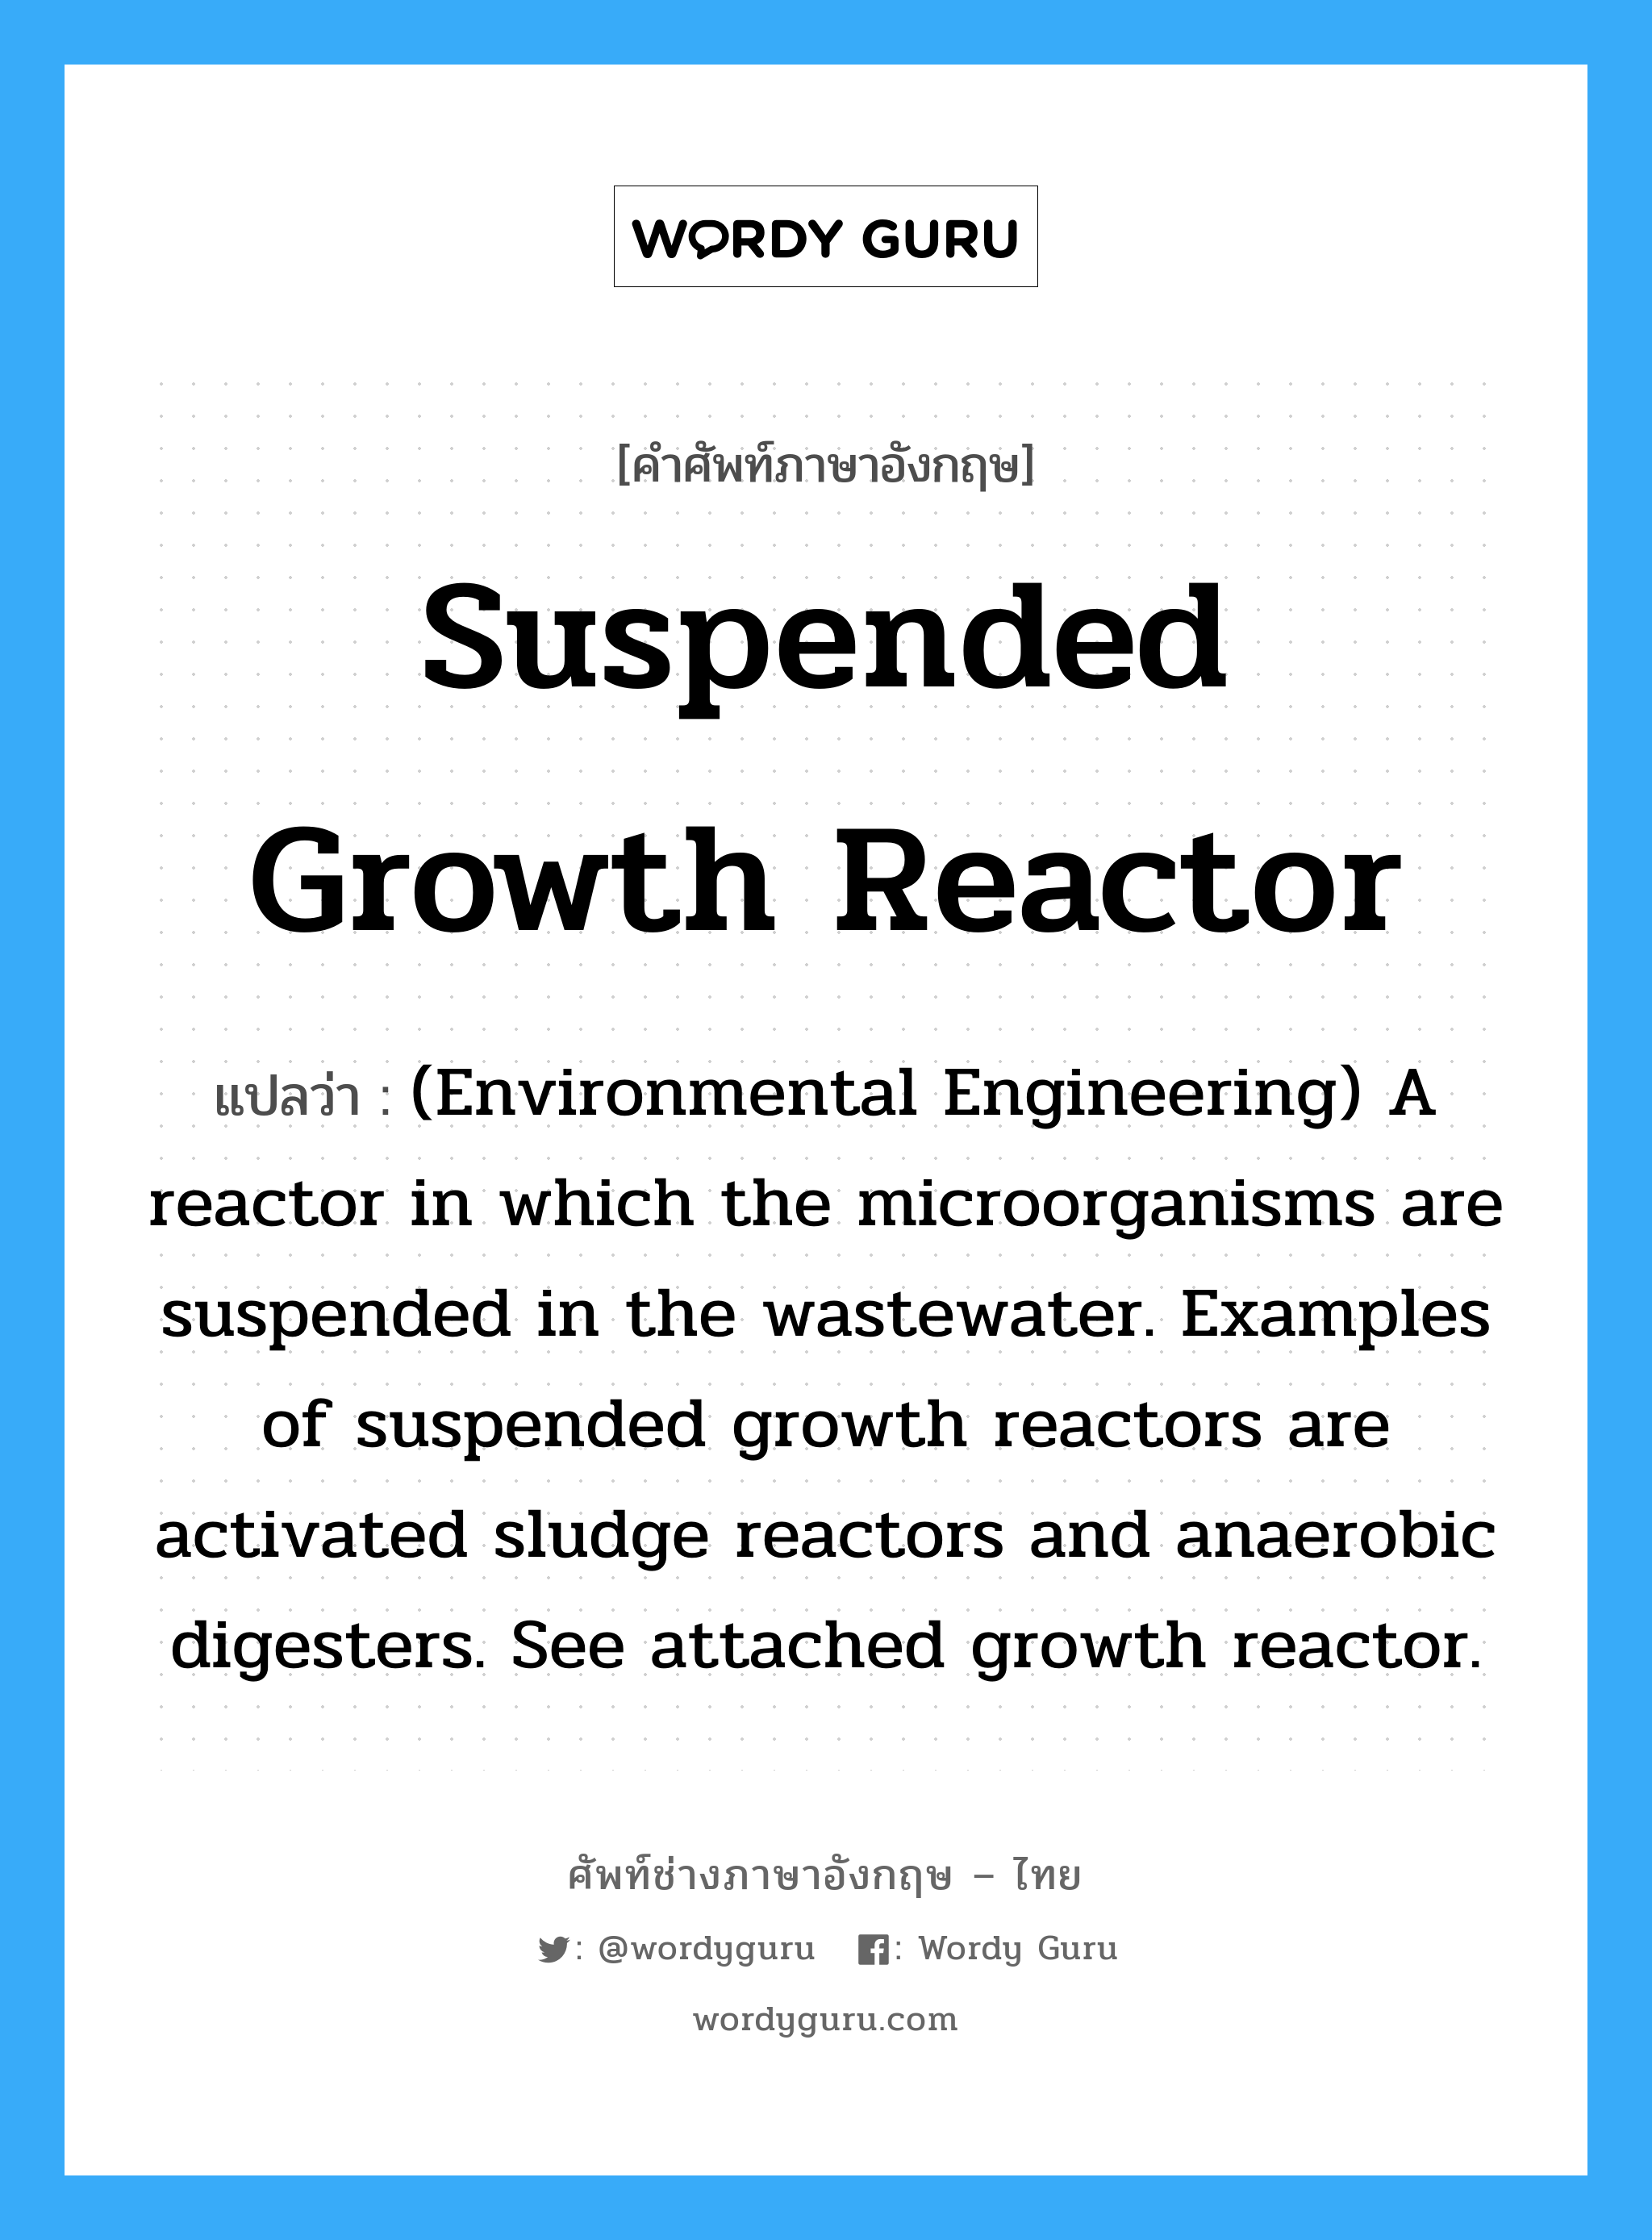 Suspended growth reactor แปลว่า?, คำศัพท์ช่างภาษาอังกฤษ - ไทย Suspended growth reactor คำศัพท์ภาษาอังกฤษ Suspended growth reactor แปลว่า (Environmental Engineering) A reactor in which the microorganisms are suspended in the wastewater. Examples of suspended growth reactors are activated sludge reactors and anaerobic digesters. See attached growth reactor.